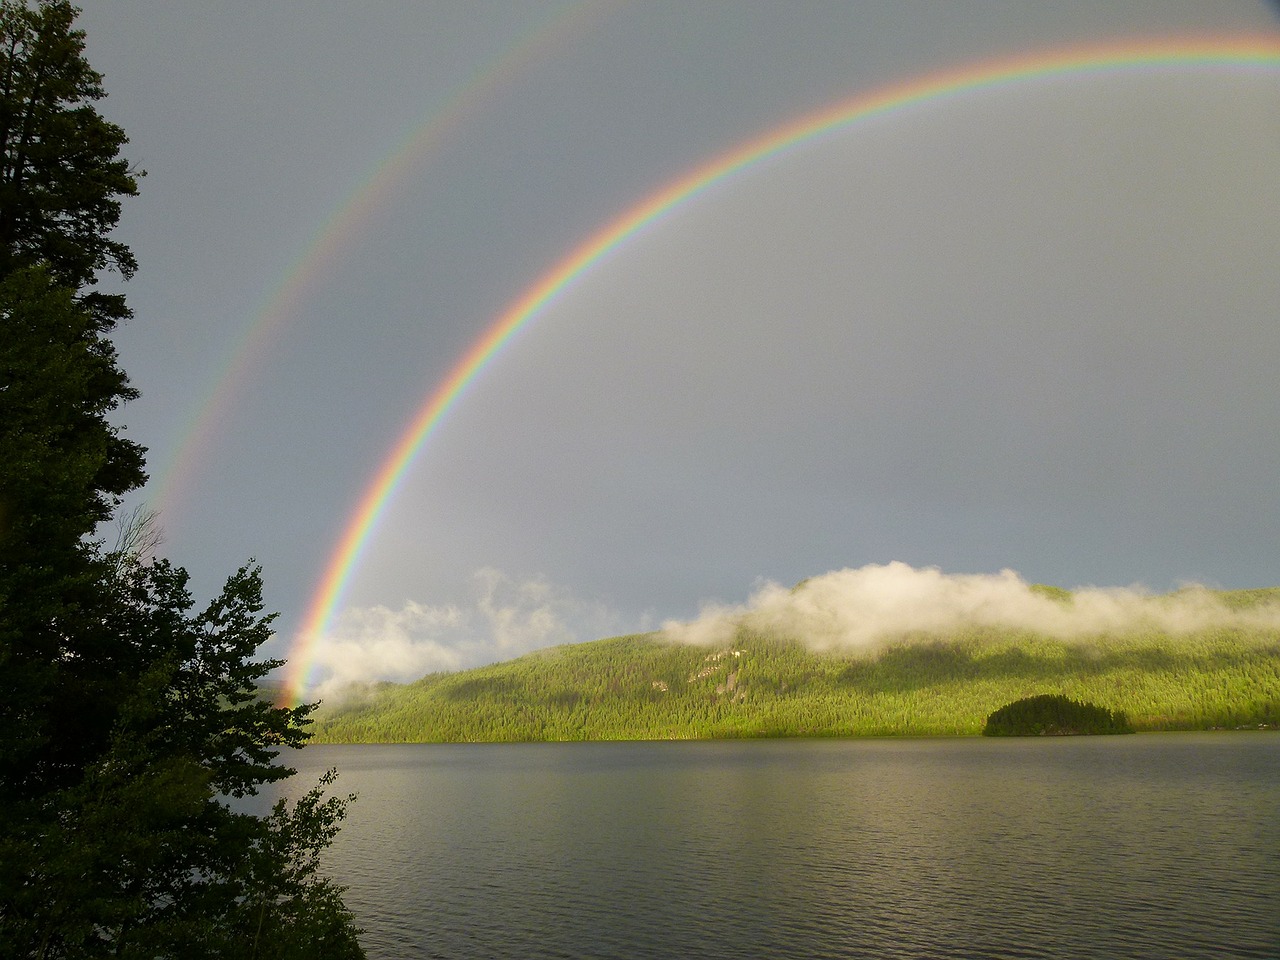 double,rainbow,thunderstorm,canim lake,british columbia,canada,nature,landscape,weather,free pictures, free photos, free images, royalty free, free illustrations, public domain